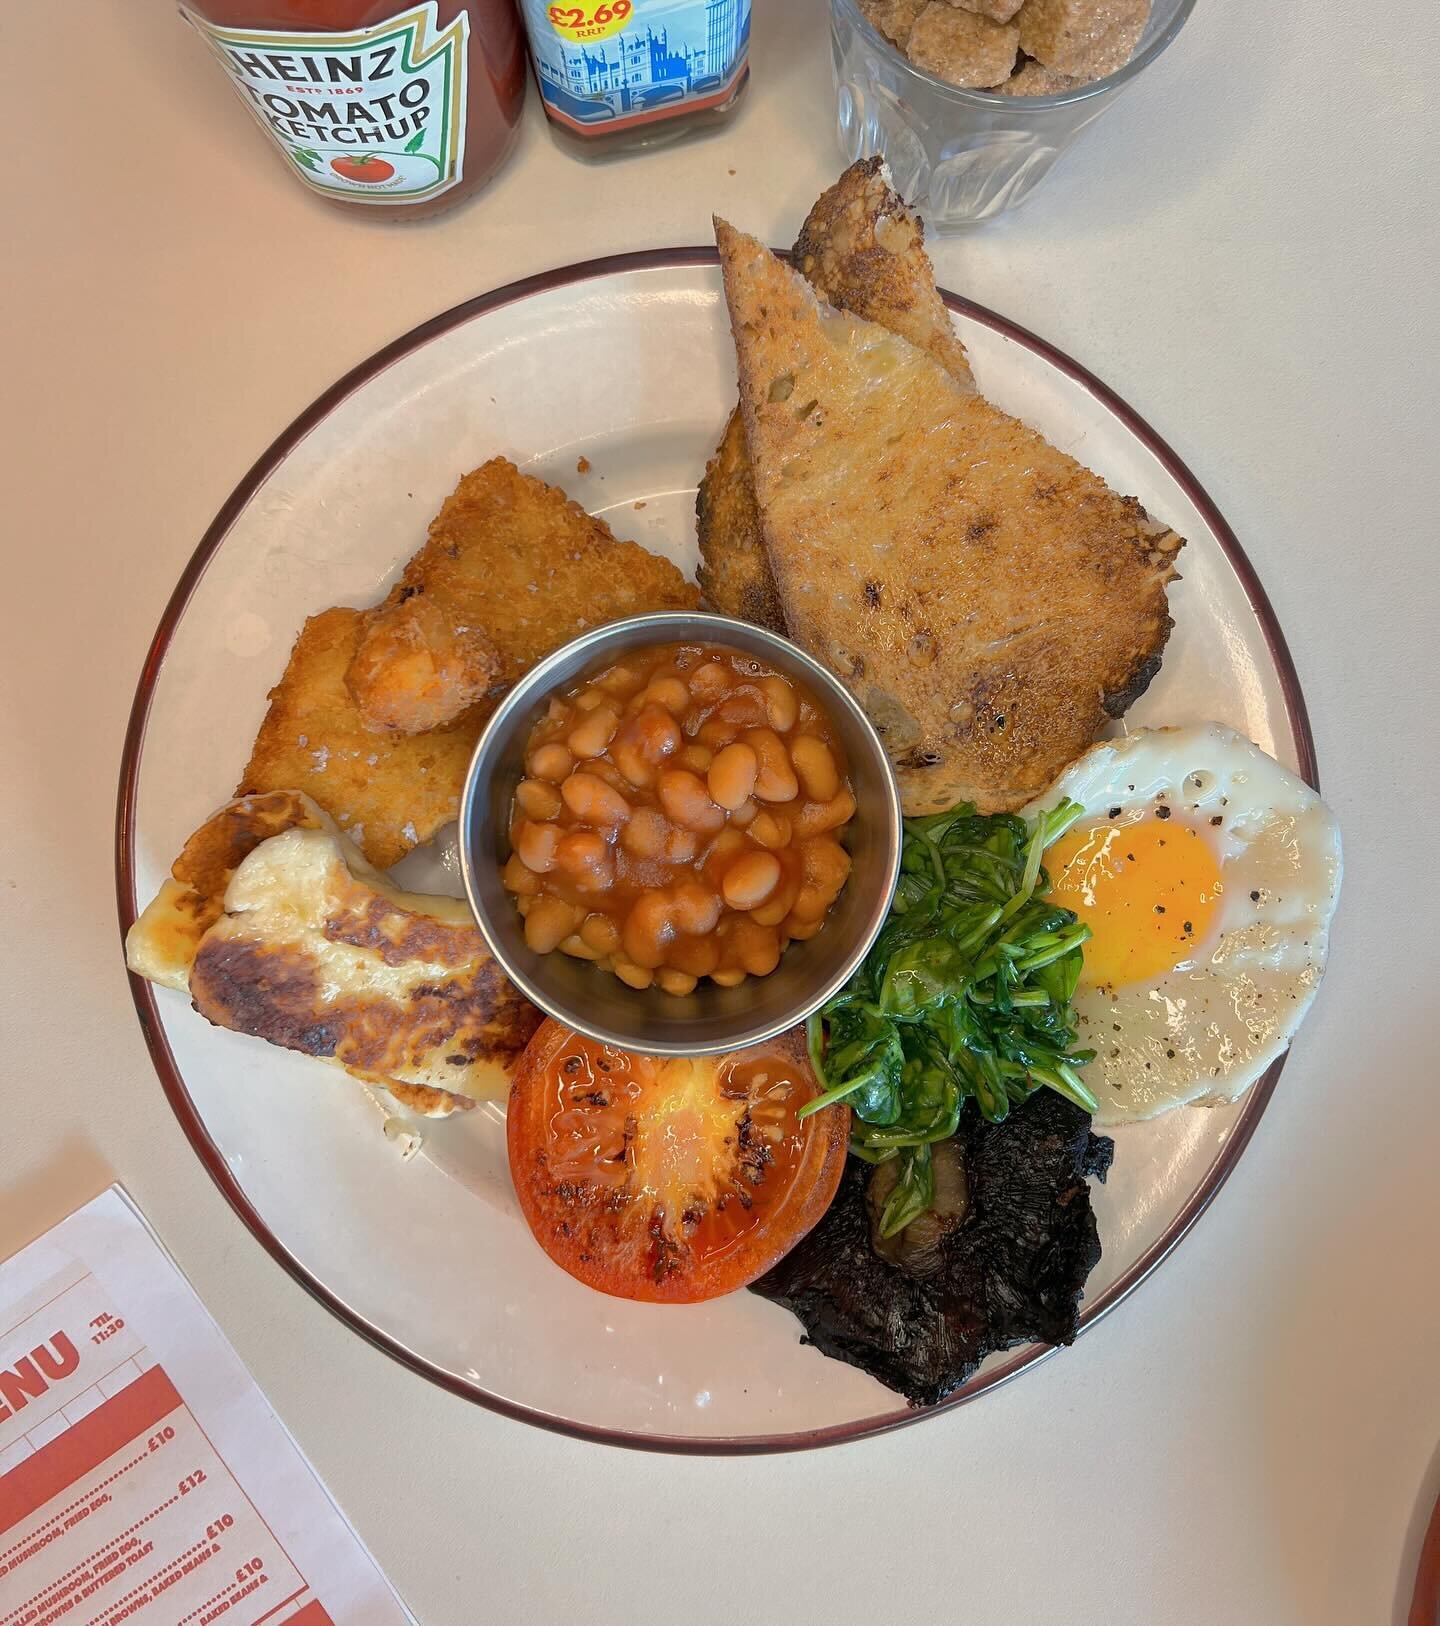 Next in our &lsquo;Fry Up&rsquo; collection is The Veggie

Grilled Halloumi, Grilled Tomato, Spinach, Portobello Mushroom, Sunnyside Egg, Hash Browns, Baked Beans &amp; Toasted Sourdough 

It&rsquo;s been a long time coming but we made it&hellip; int